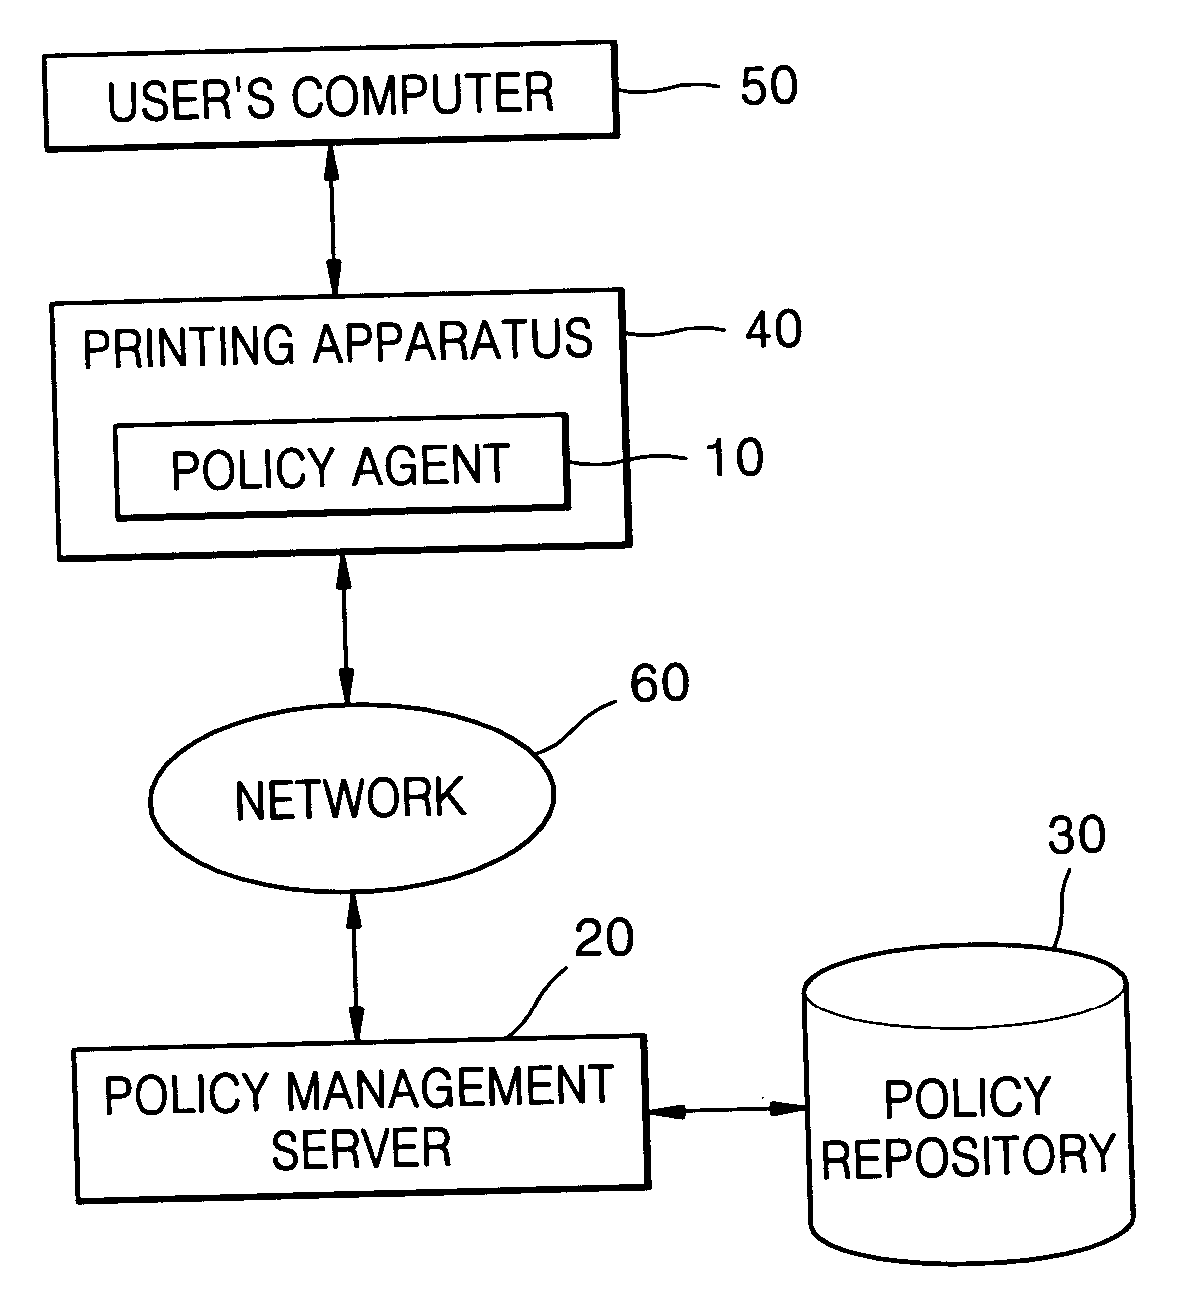 Policy-based management method and system for printing of extensible markup language (XML) documents